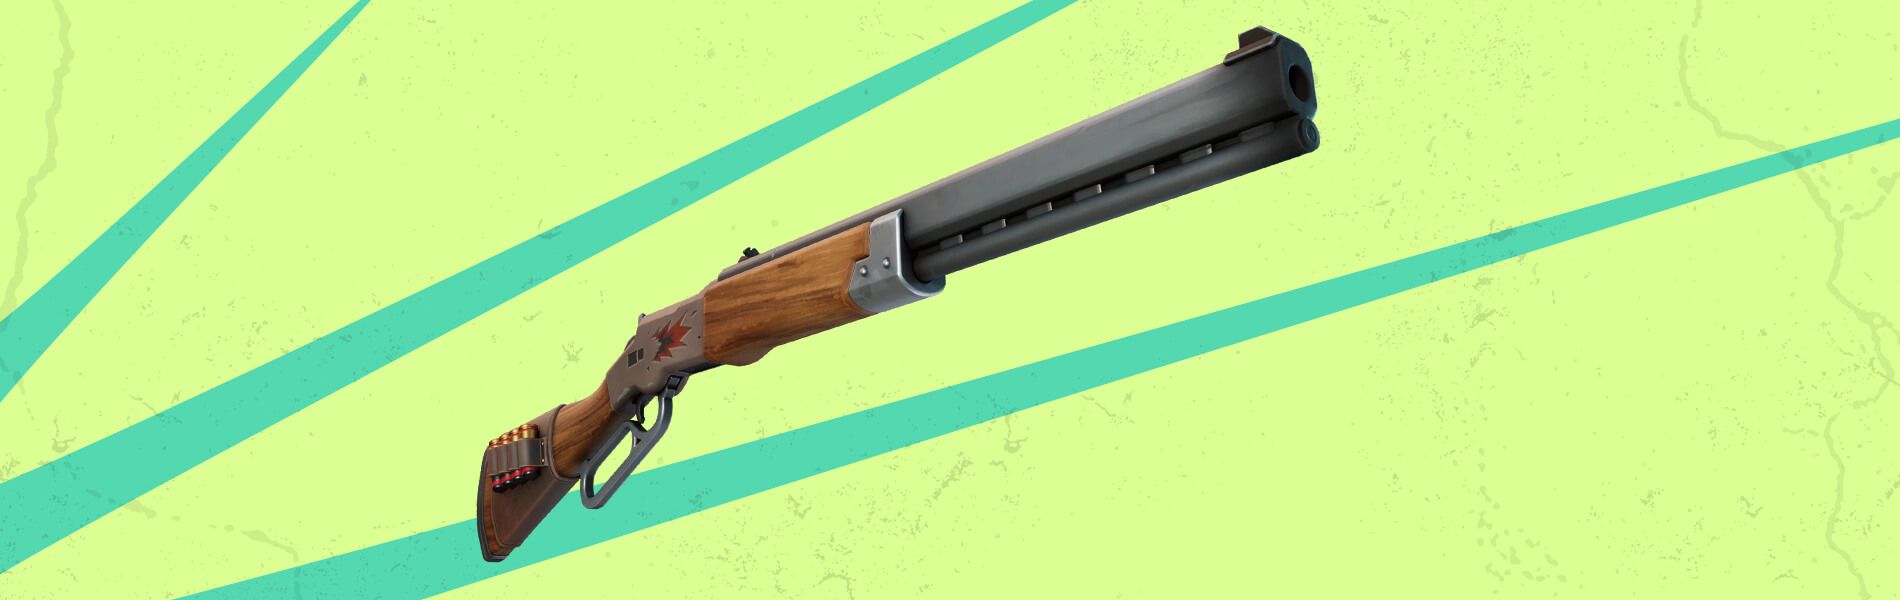 Patch Notes for Fortnite v25.11 - Explosive Repeater Rifle Added, Heavy Sniper Vaulted